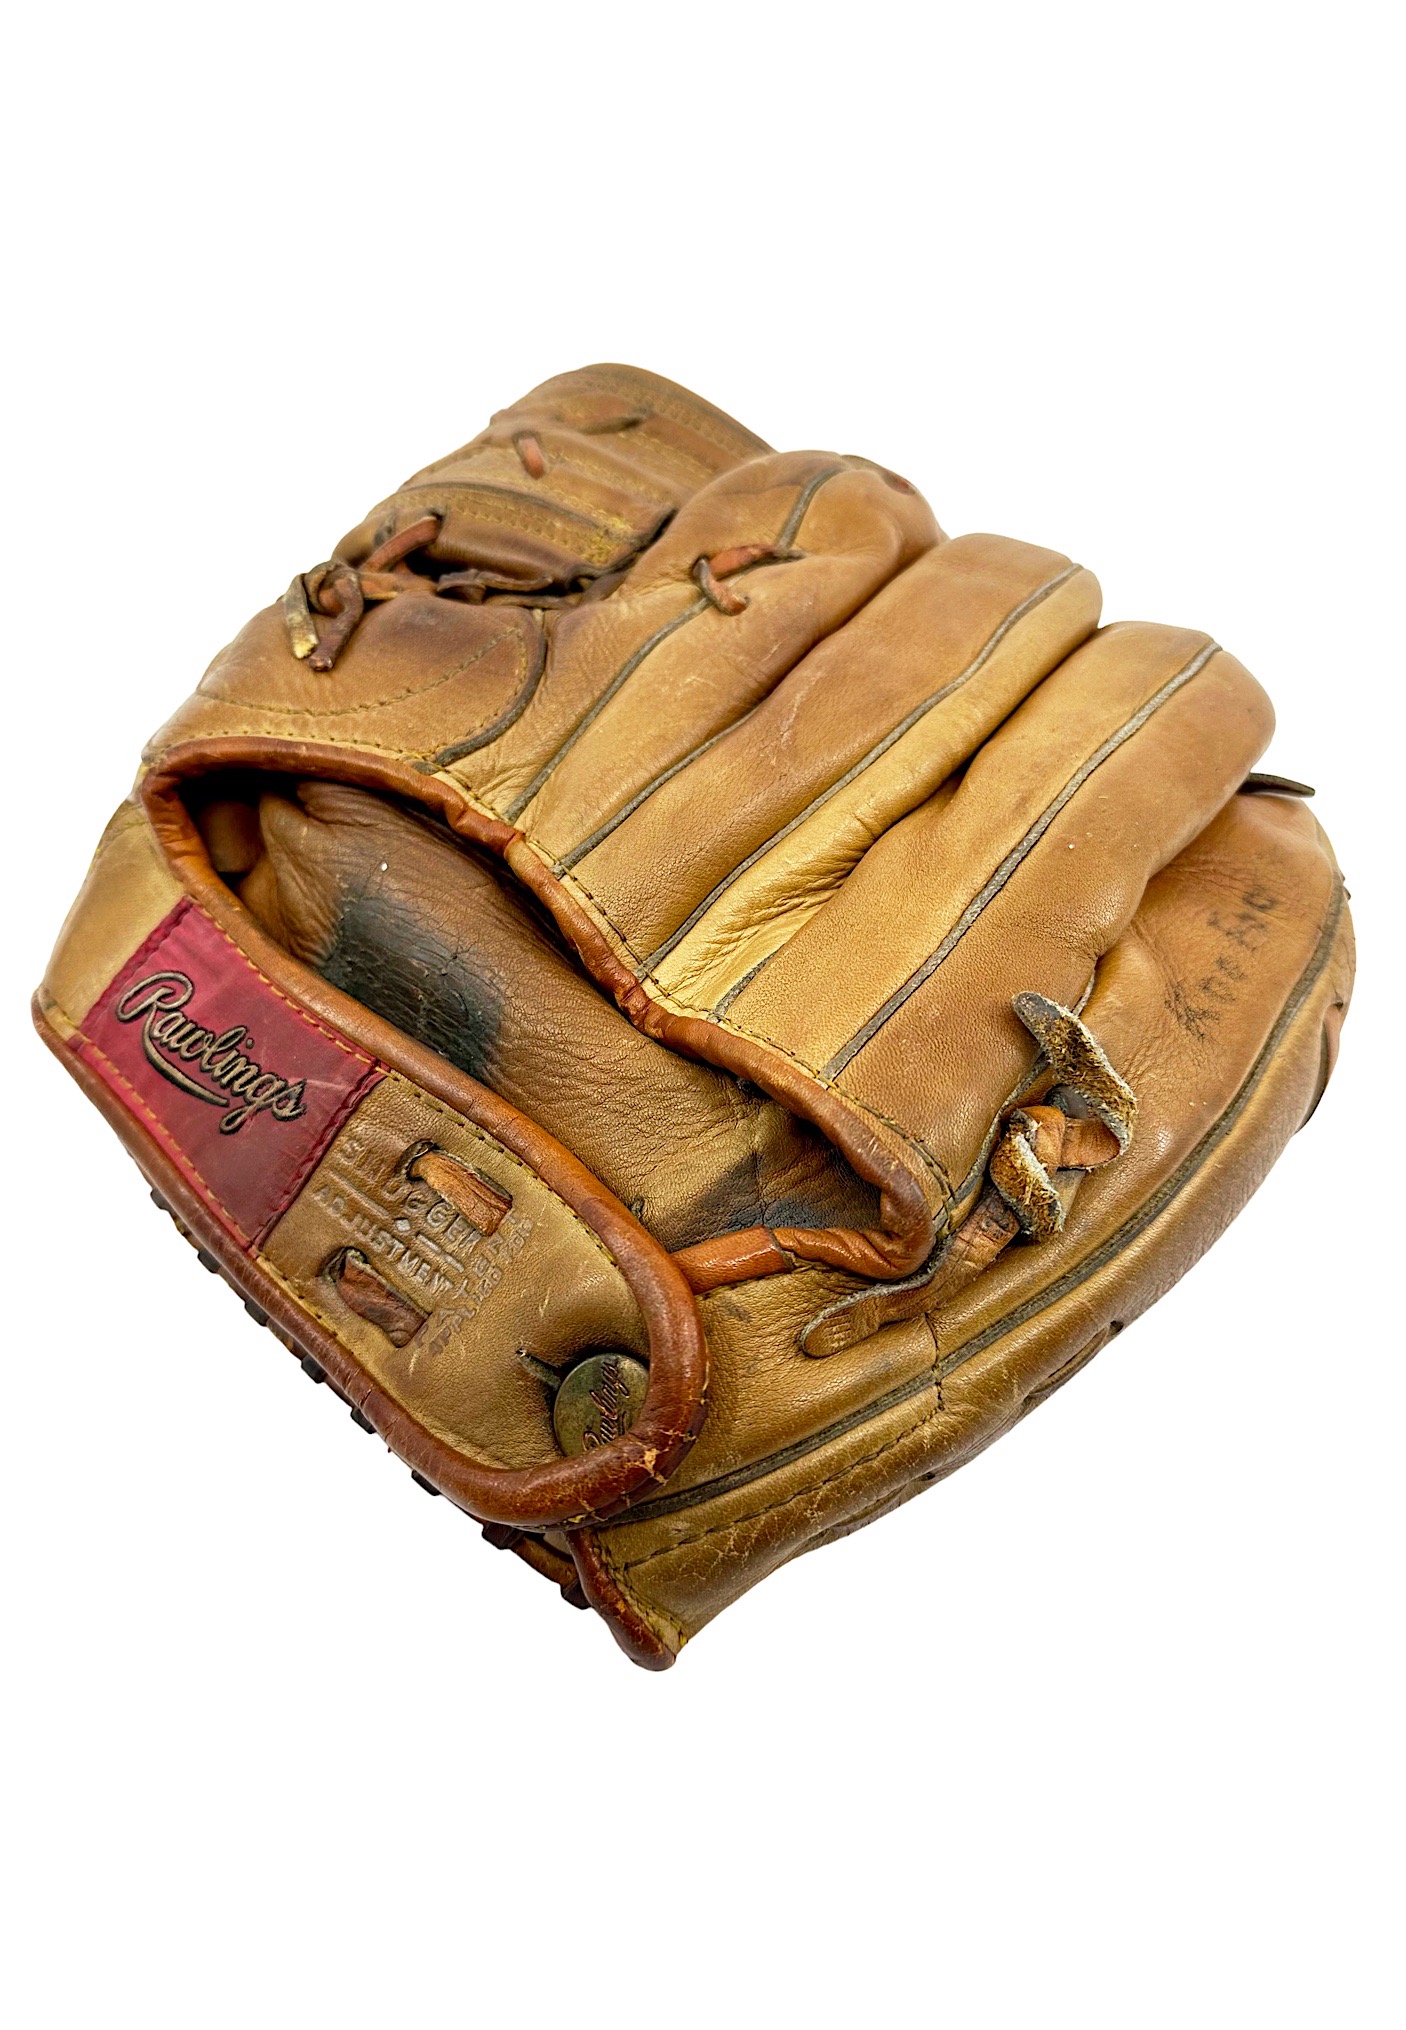 1956 Sandy Koufax Brooklyn Dodgers Game-Used Glove (PSA/DNA • Sourced from Teammate)